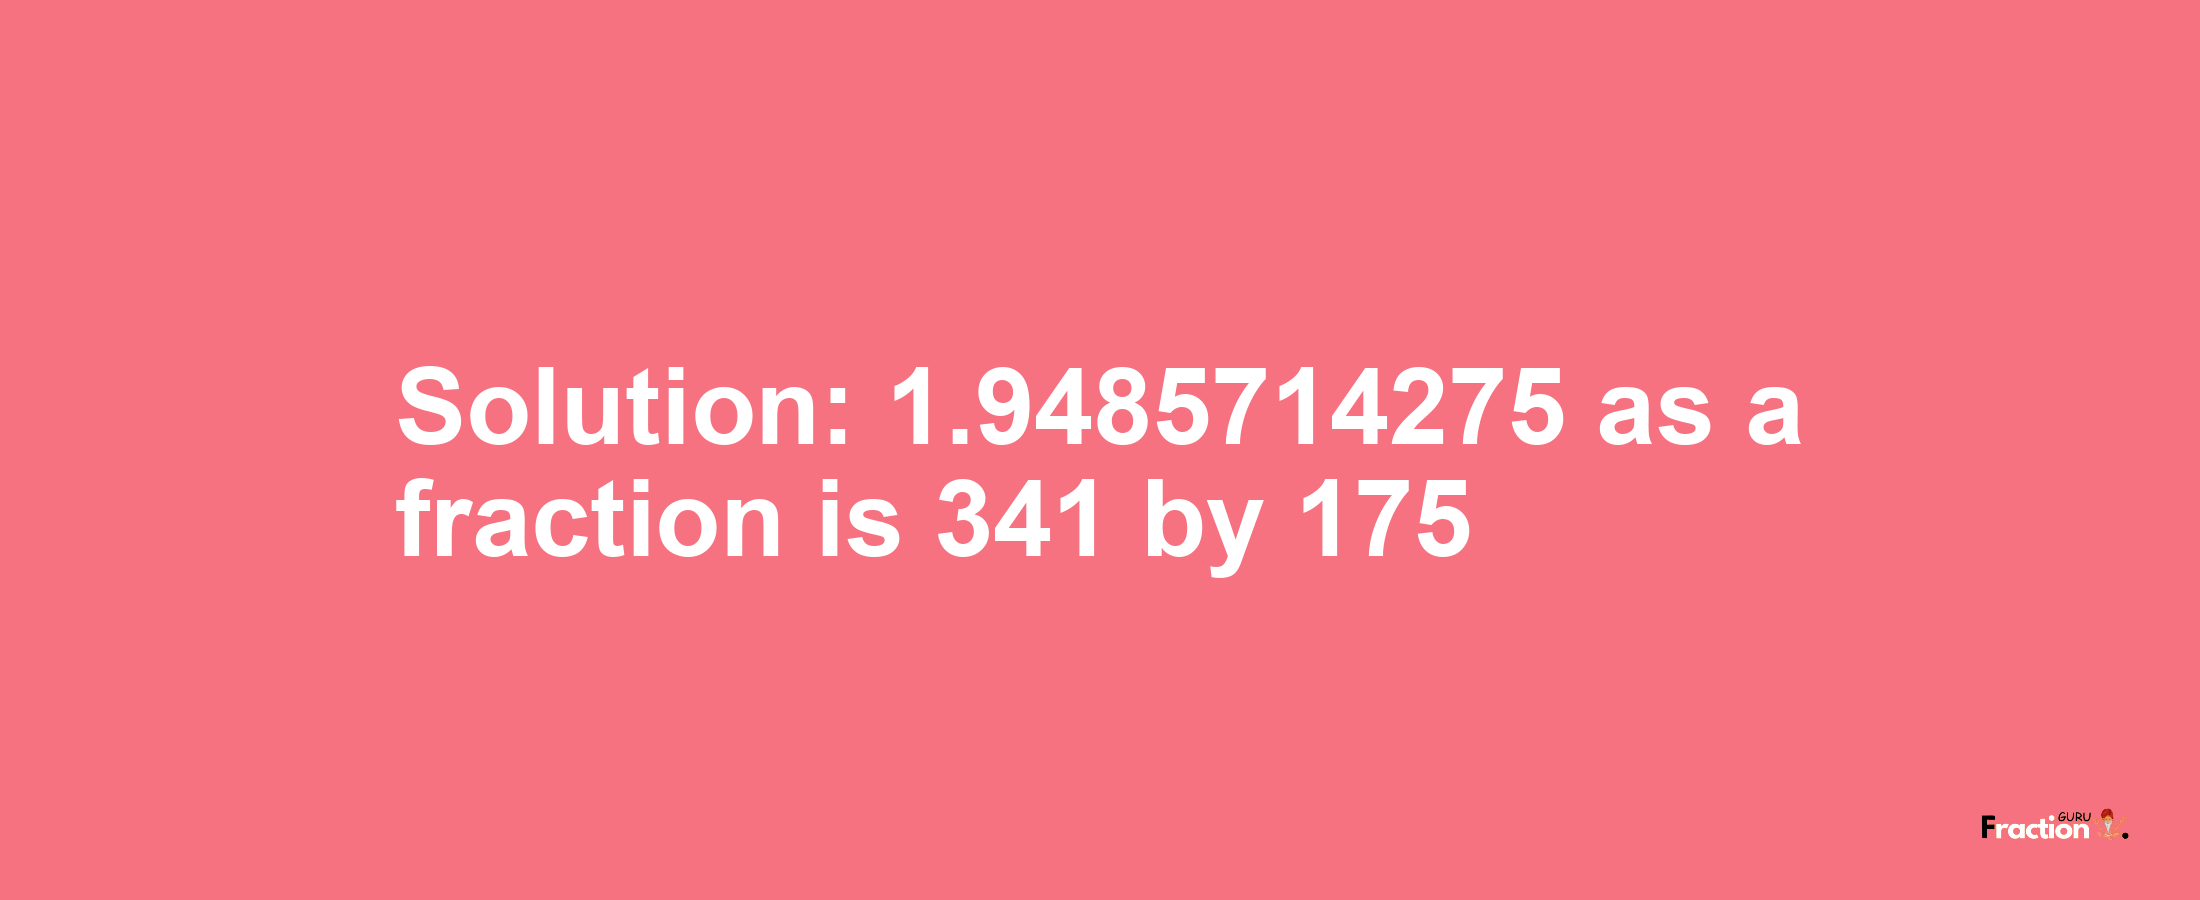 Solution:1.9485714275 as a fraction is 341/175